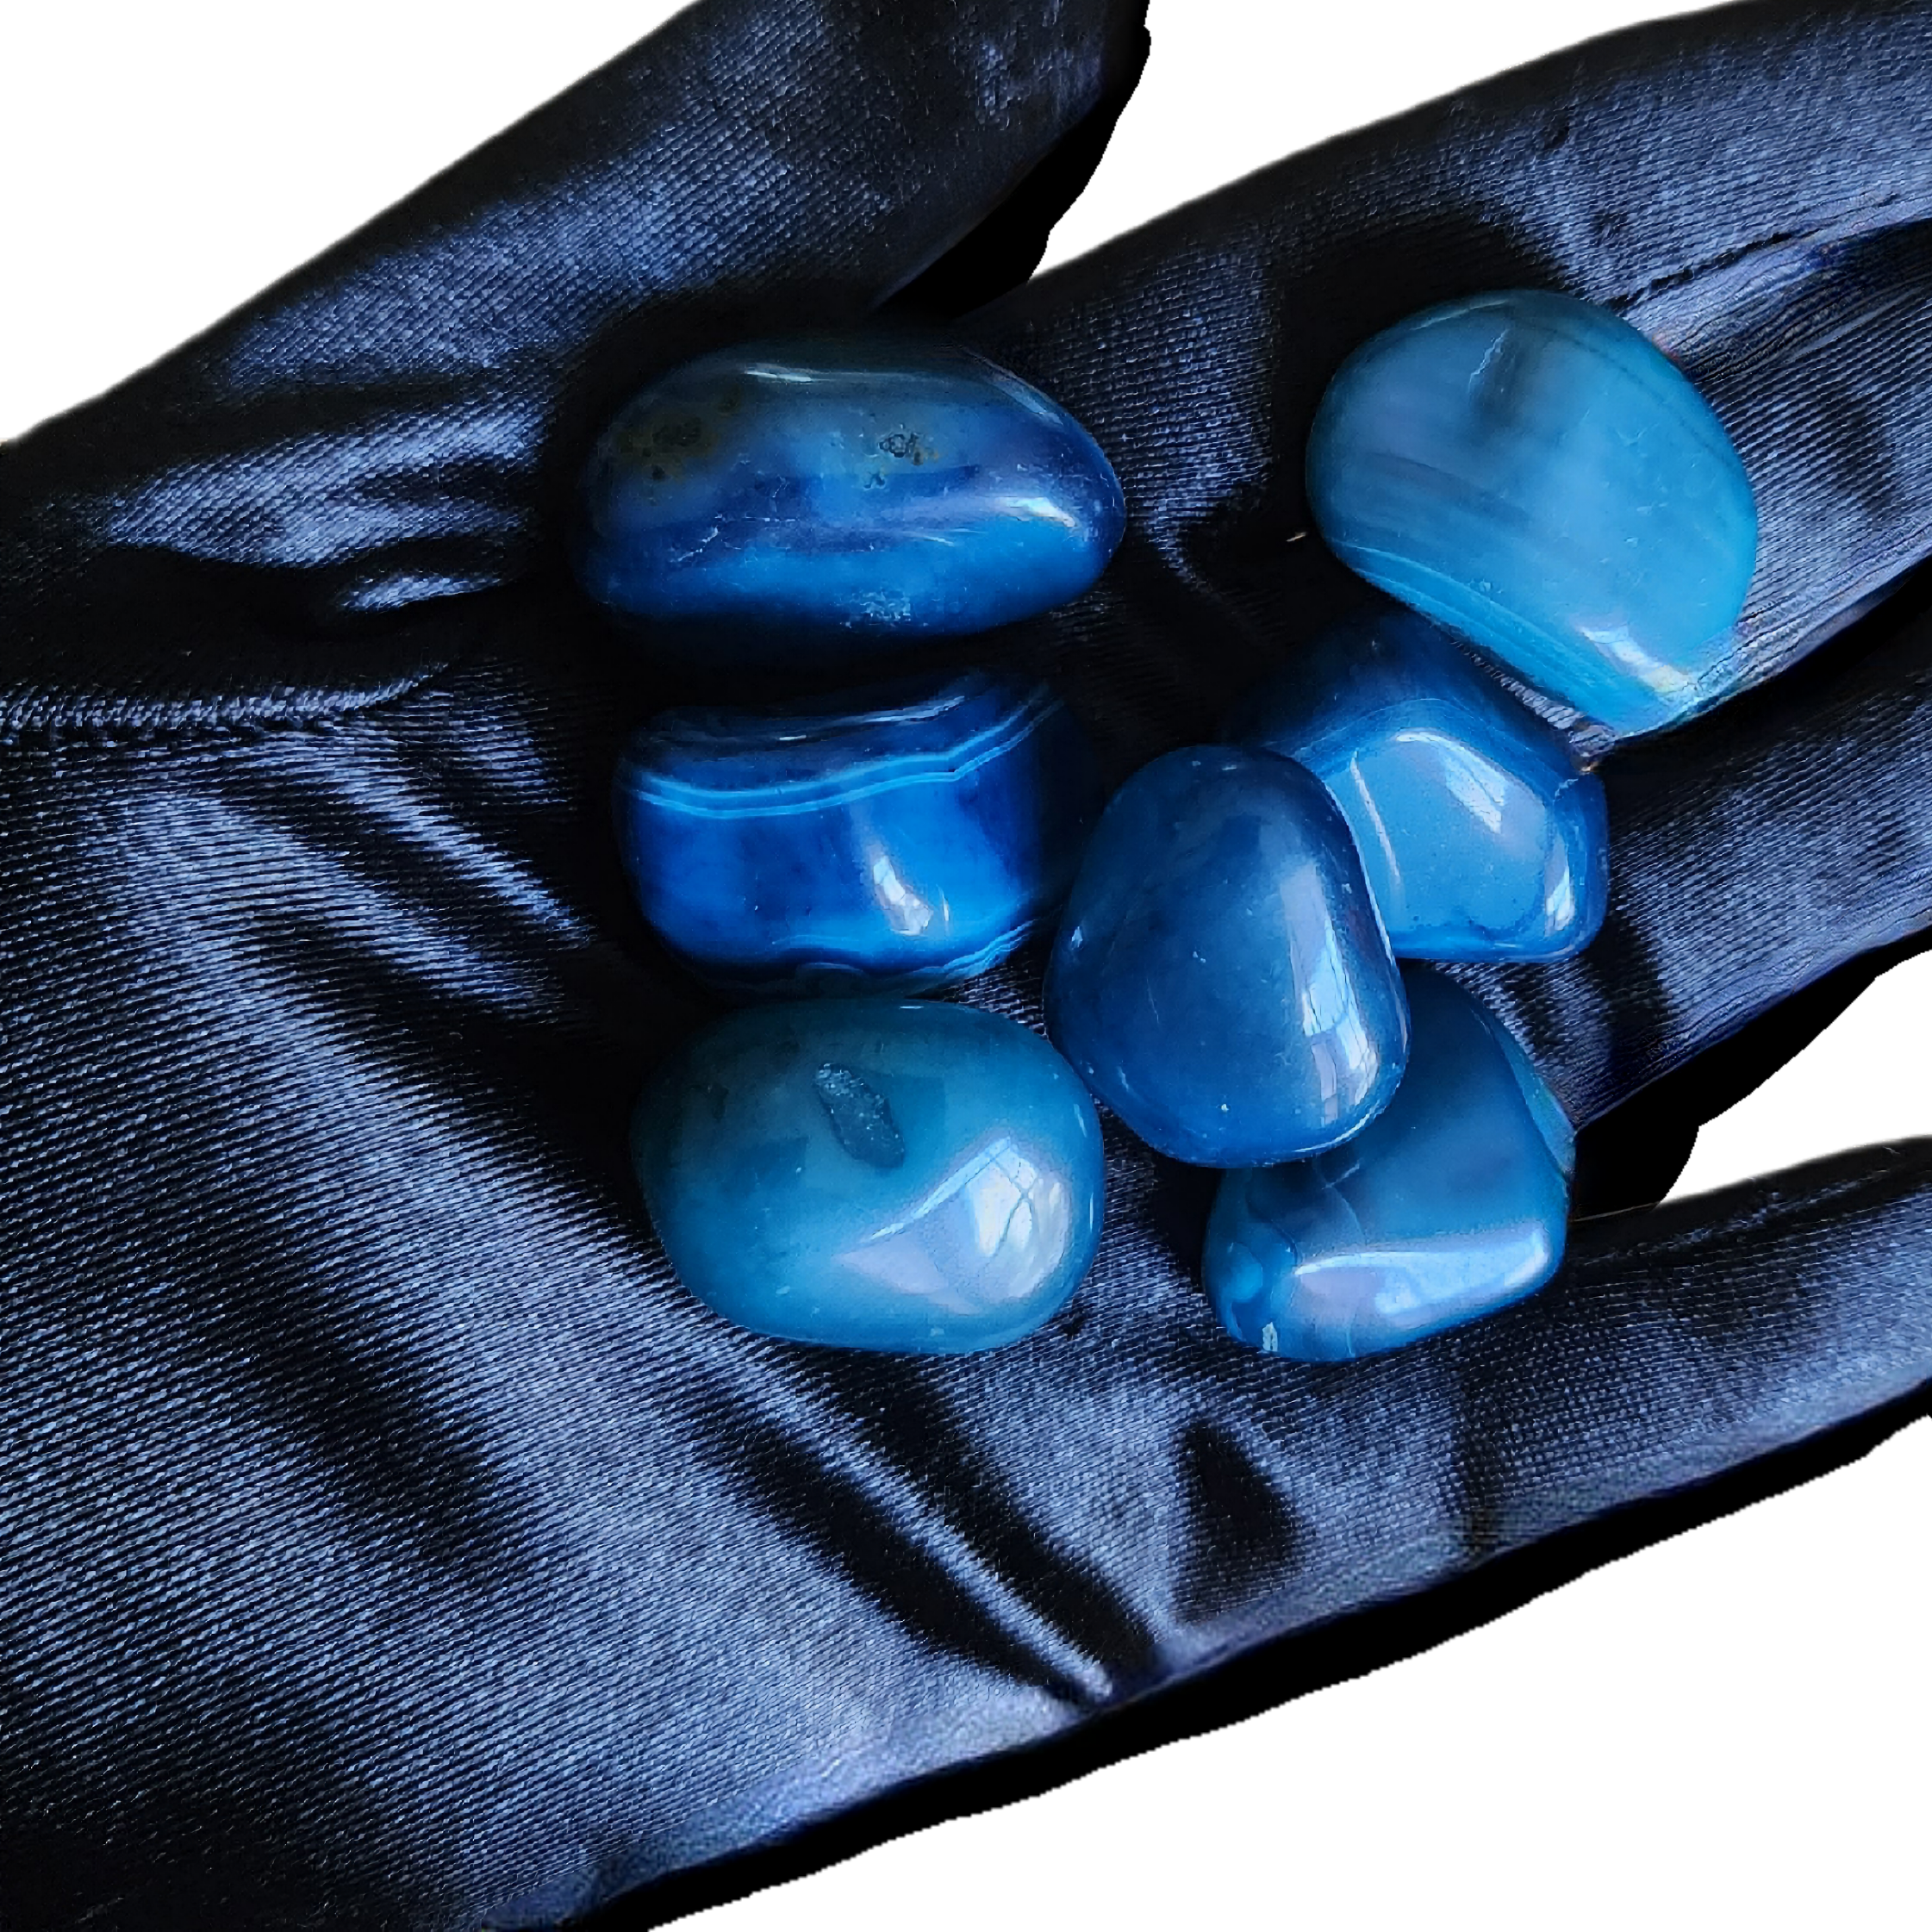 Beautiful TEAL Agate Crystal Tumbled Stones - For Anxiety, Intuition, Spirit Communication, & Much More!